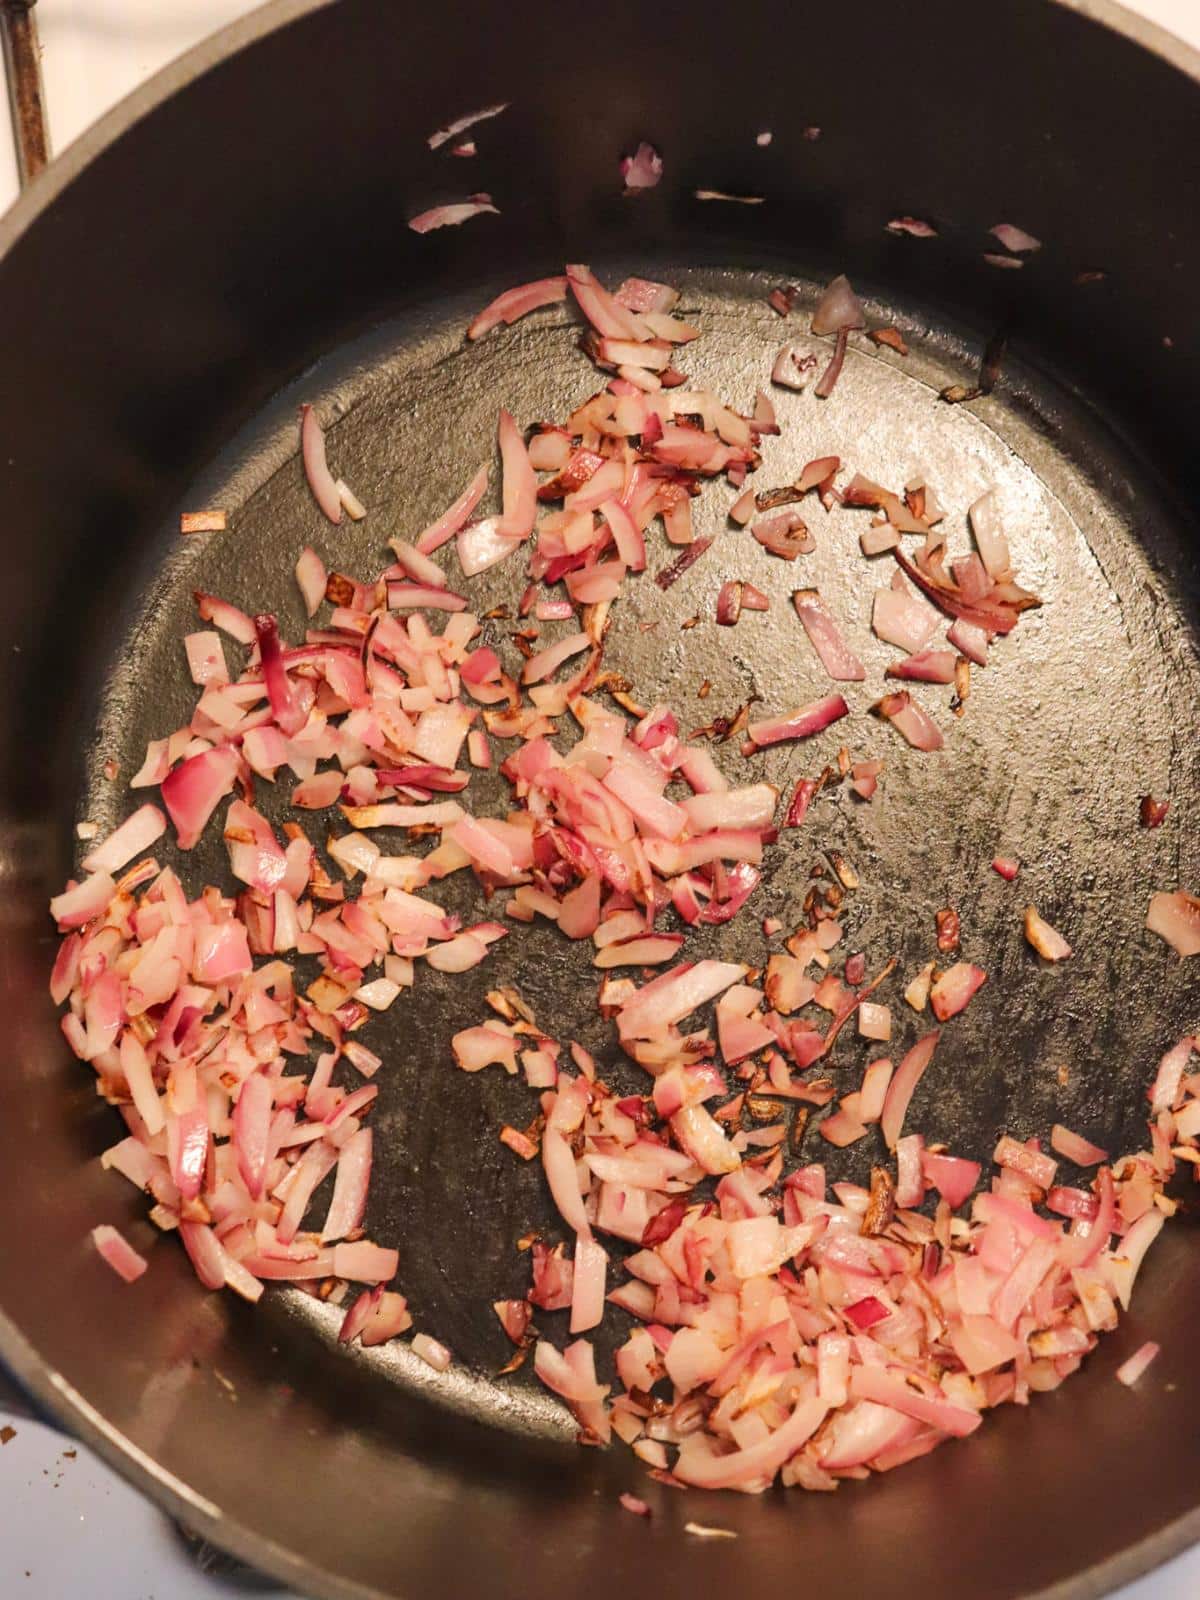 Red onions sautéing in a large pot on the stove.